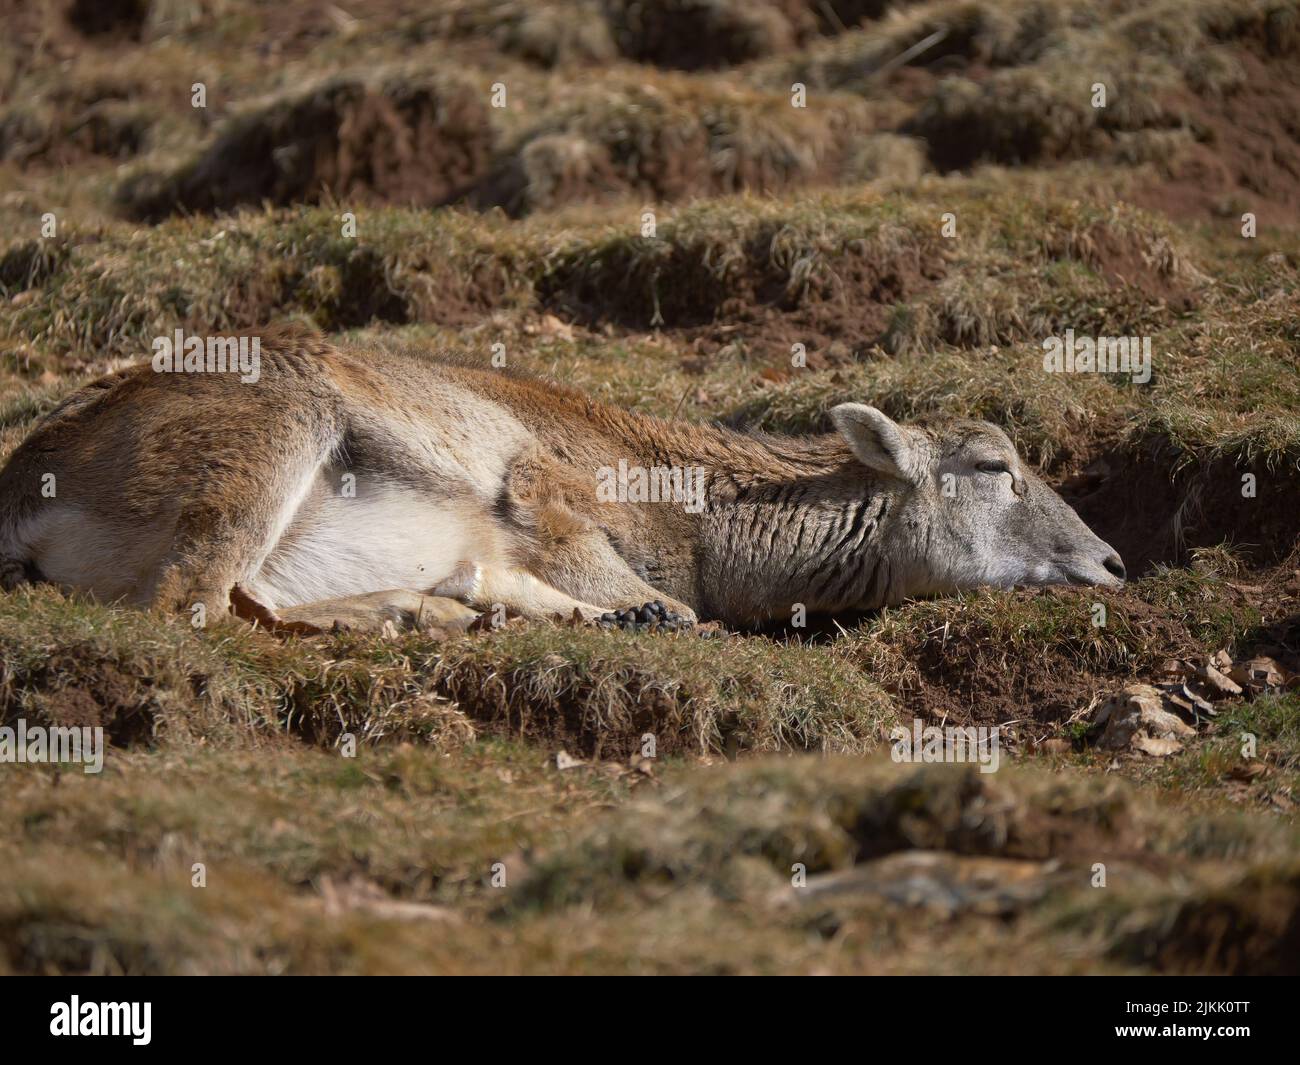 A closeup shot of the deer lying on the ground at daytime Stock Photo